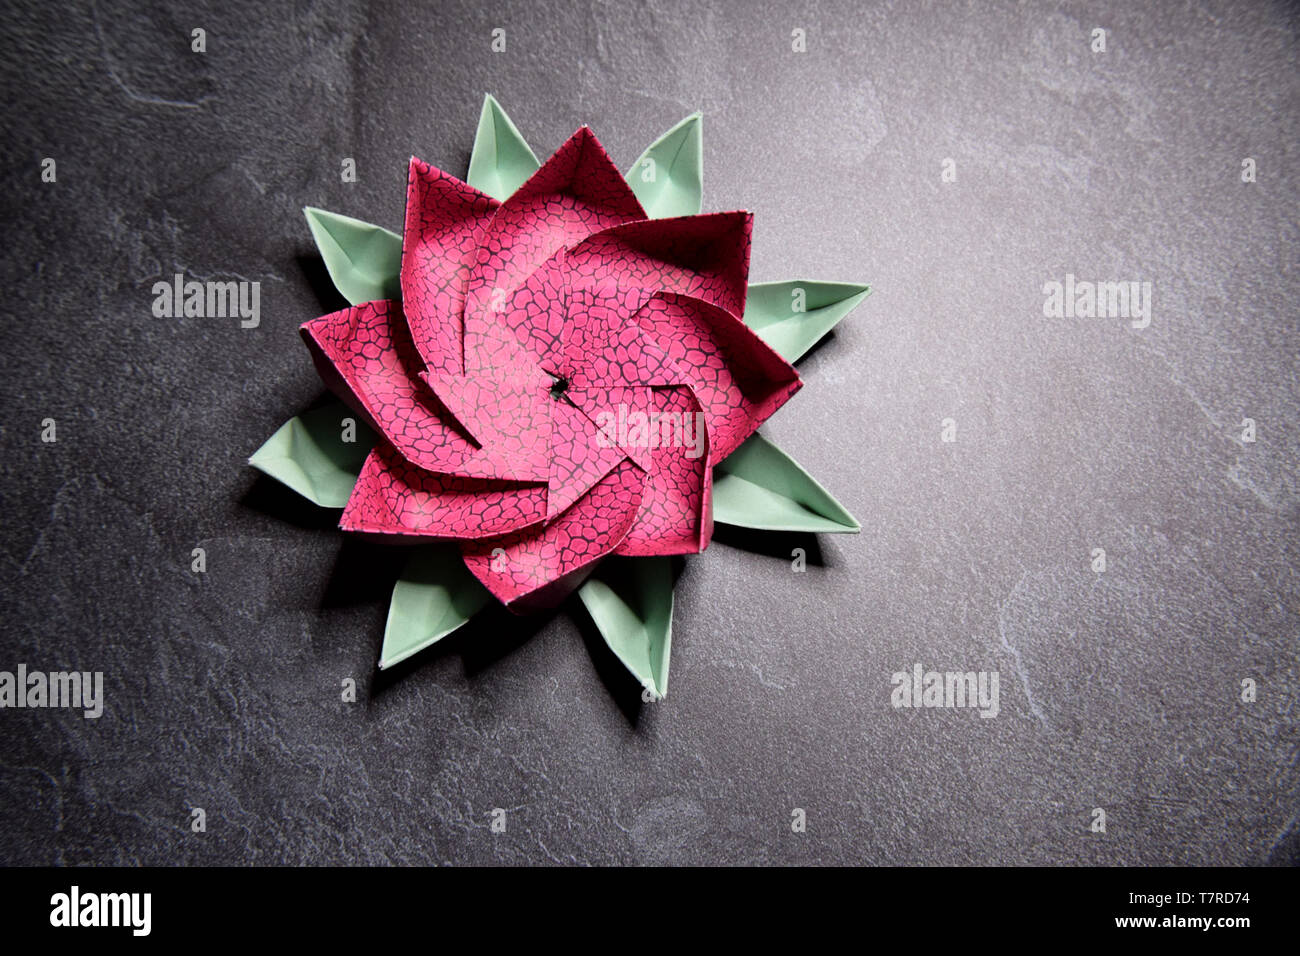 Pink Origami Lotus Flower - Ars and Crafts, Paper Art on Textured Stone  Backgrund Stock Photo - Alamy